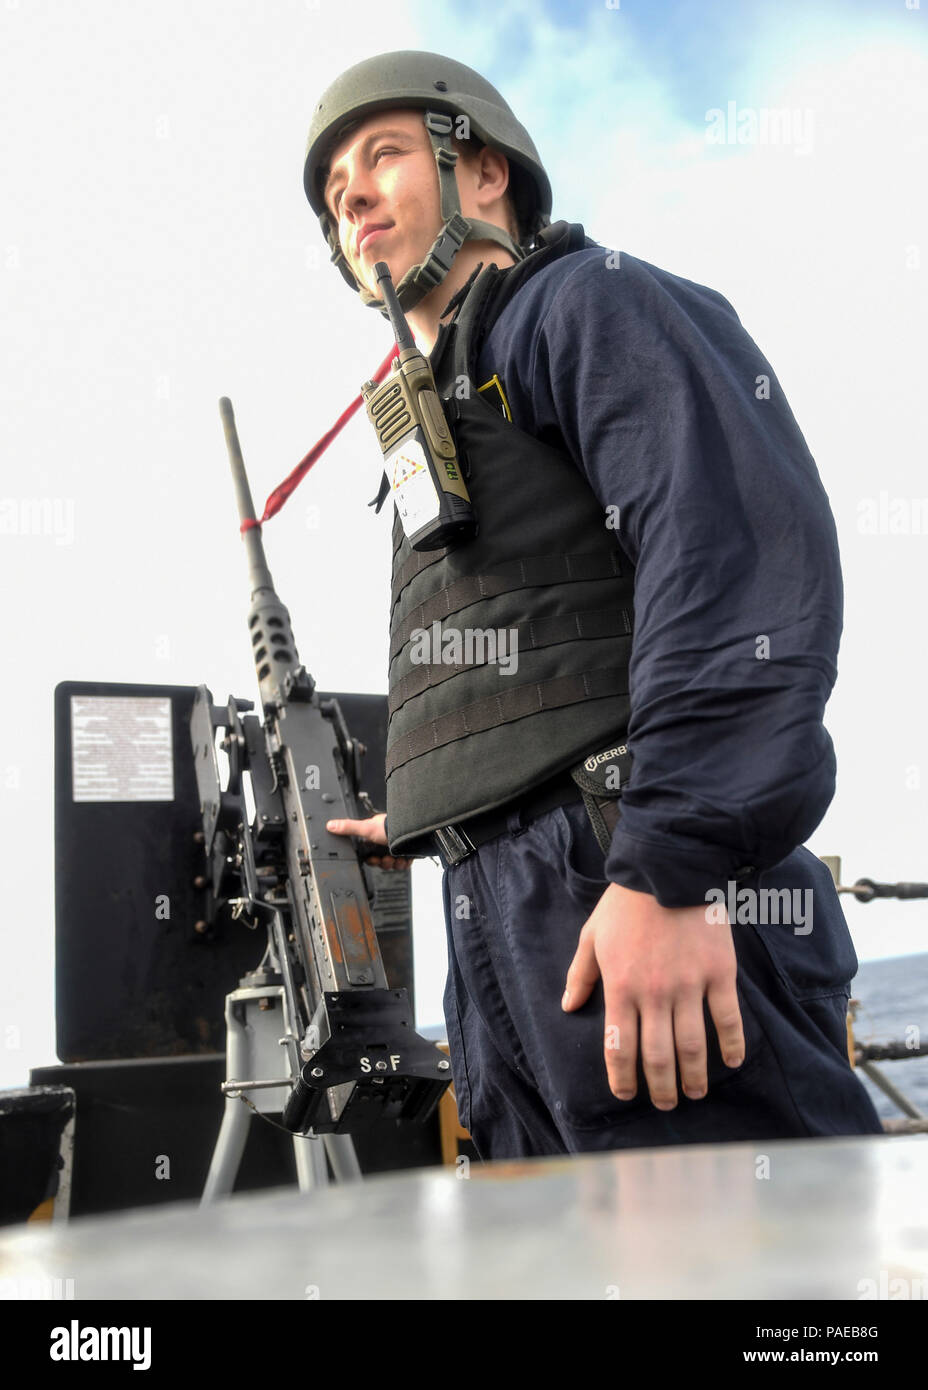 160325-N-DQ503-028ATLANTIC OCEAN (March 25, 2016) – Gunner’s Mate 2nd Class Jacob Kearney, from Wausa, Nebraska, mans a .50 caliber machine gun for his small caliber assault team (SCAT) station on the forecastle aboard the guided-missile destroyer USS Roosevelt (DDG 80) during a strait transit exercise. Roosevelt is underway conducting Composite Training Unit Exercise (COMPTUEX) with the Eisenhower Carrier Strike Group in preparation for a future deployment. (U.S. Navy Photo by Mass Communication Specialist 3rd Class Taylor A. Elberg/Released) Stock Photo